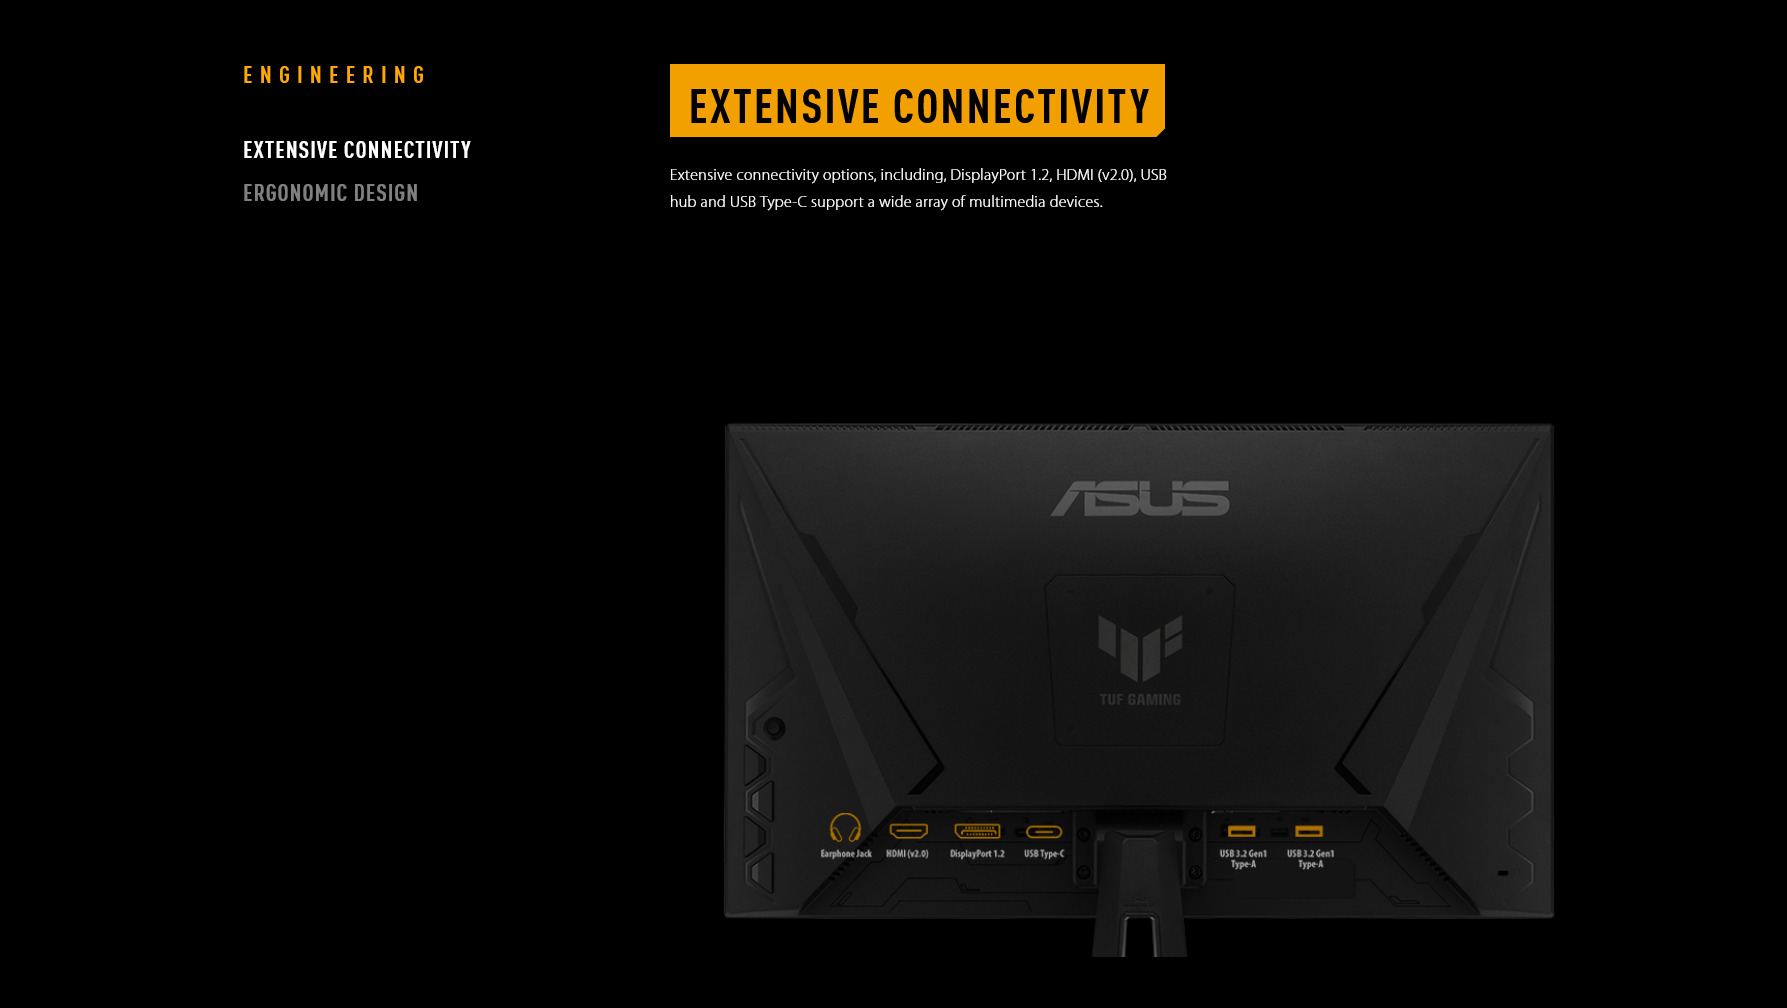 A large marketing image providing additional information about the product ASUS TUF Gaming VG27AC1A 27"  WQHD 170Hz Fast IPS Monitor - Additional alt info not provided